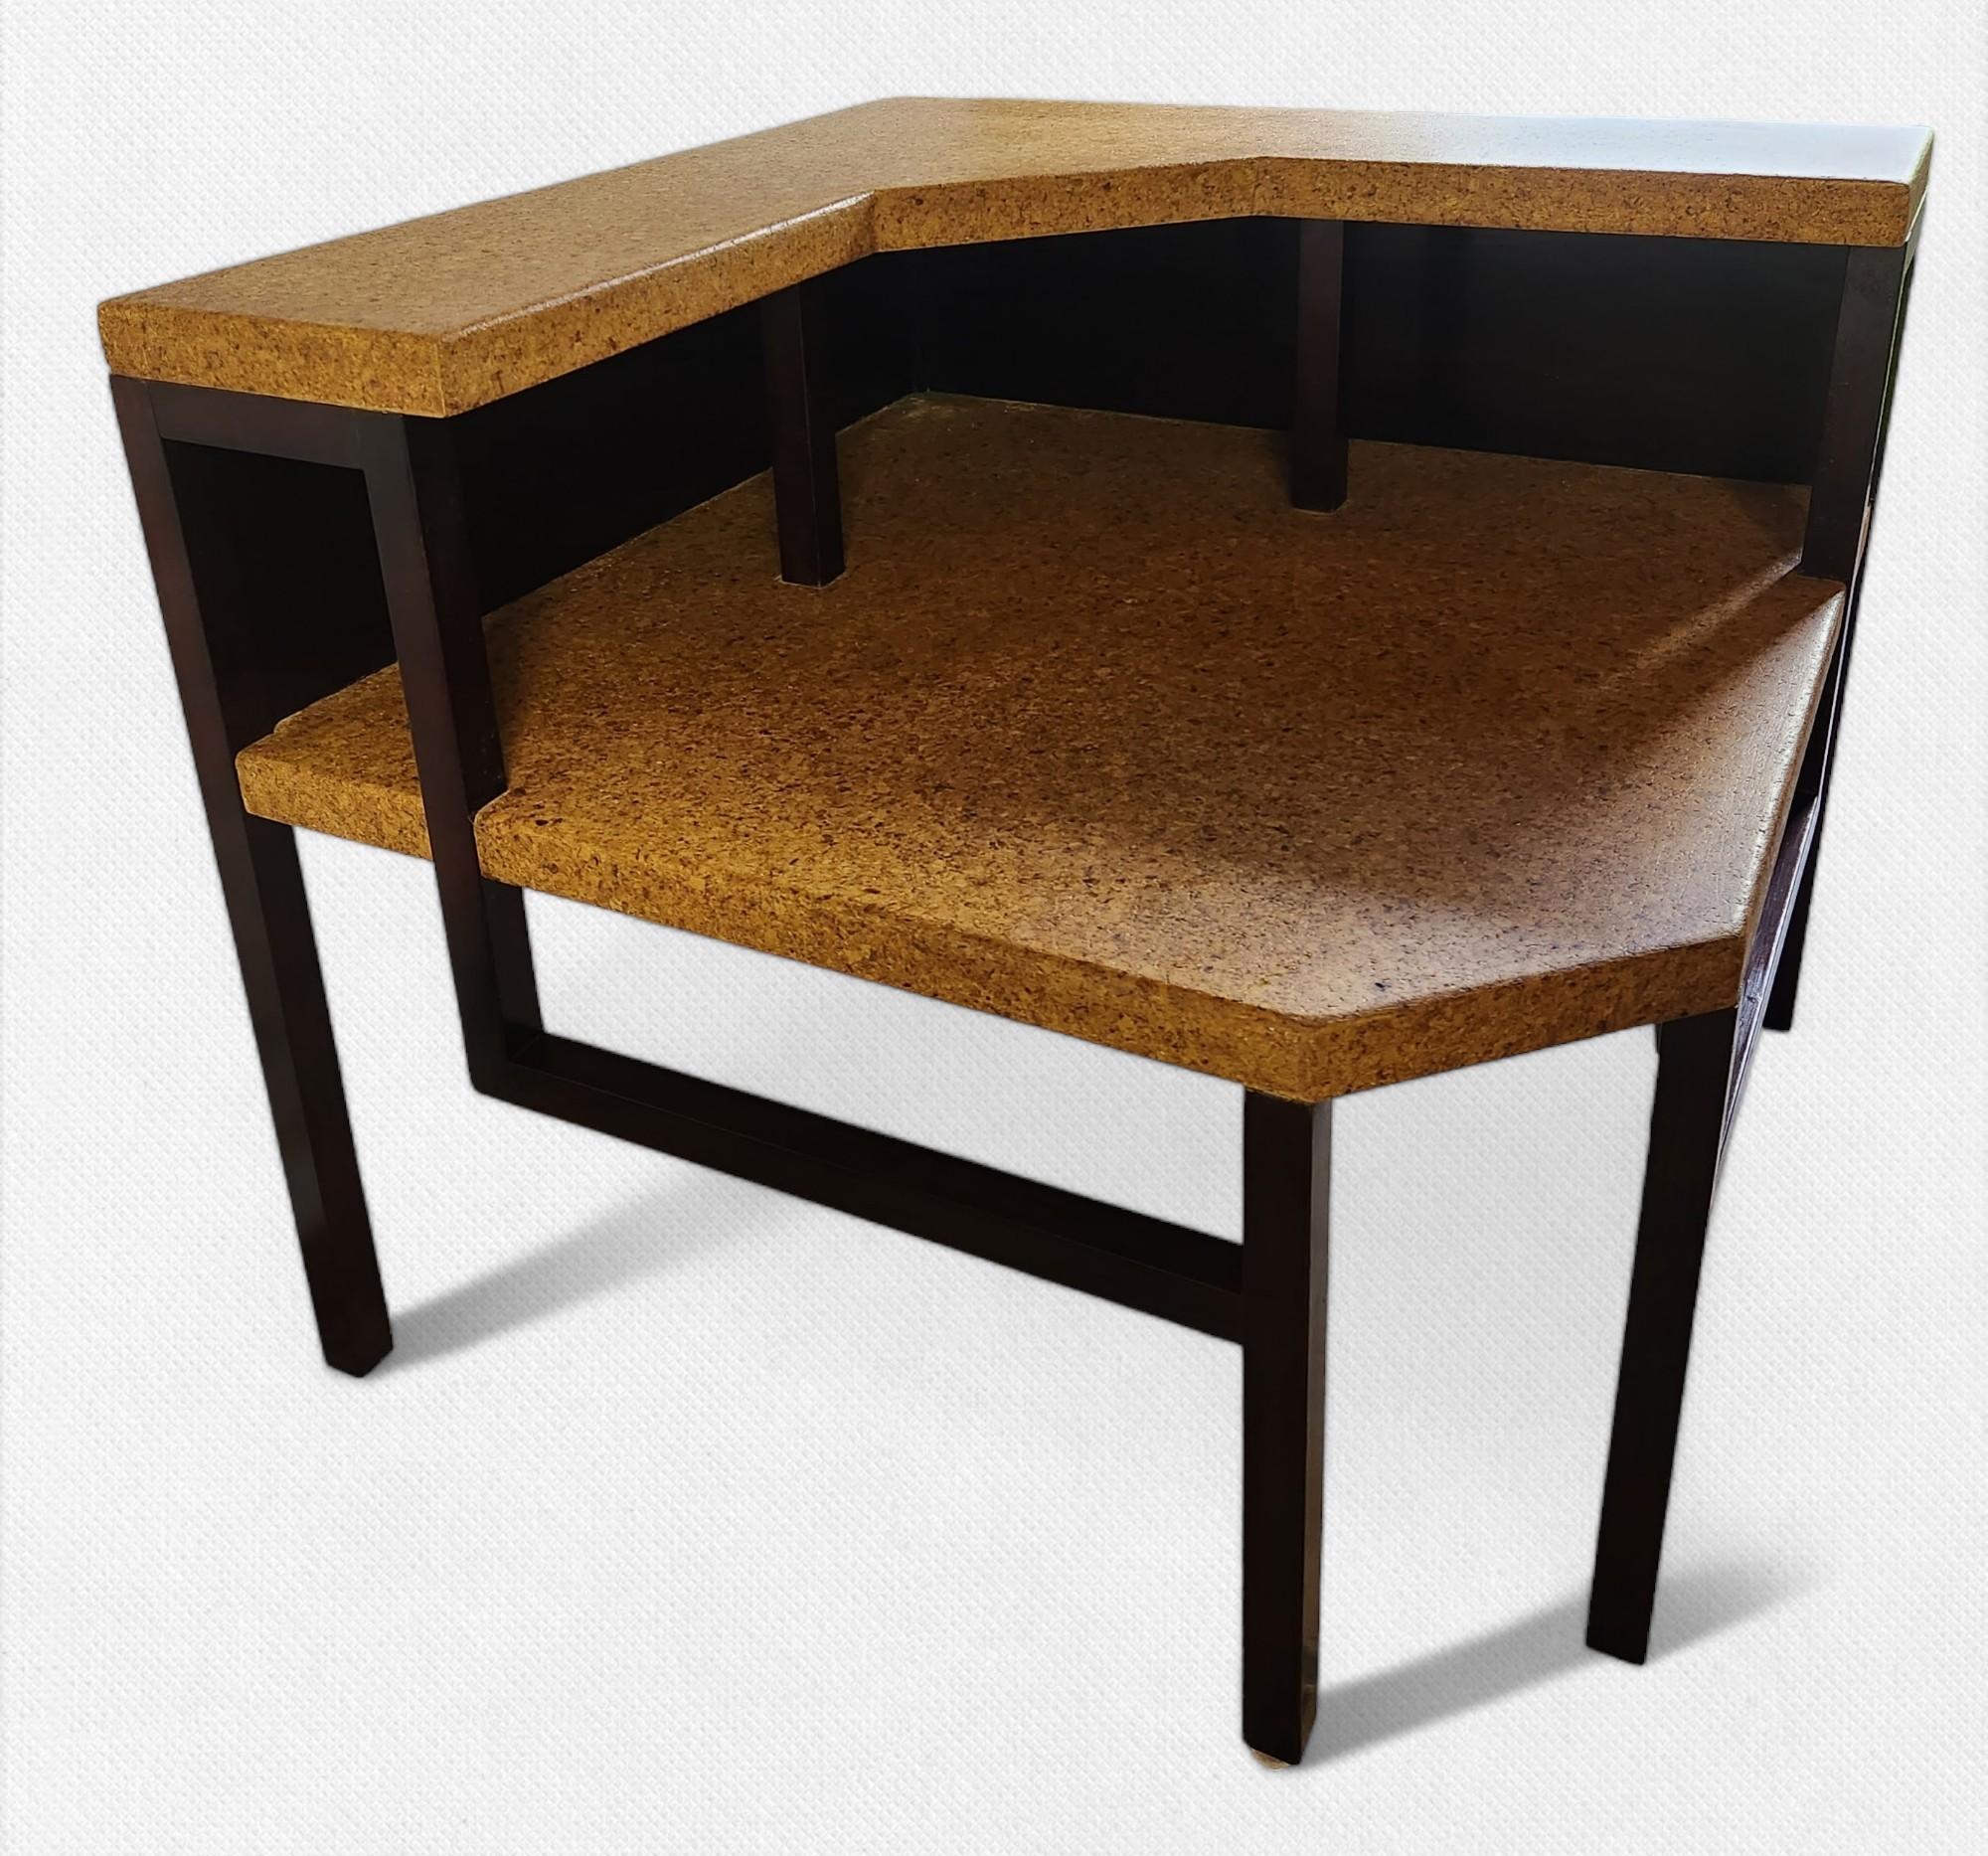 Paul Frankl corner table for Johnson Furniture Company of Grand Rapids, Michigan from the 1950s.
The frame is a rosewood stained maple with clear lacquered cork tops.
Restored in very good condition with no issues.